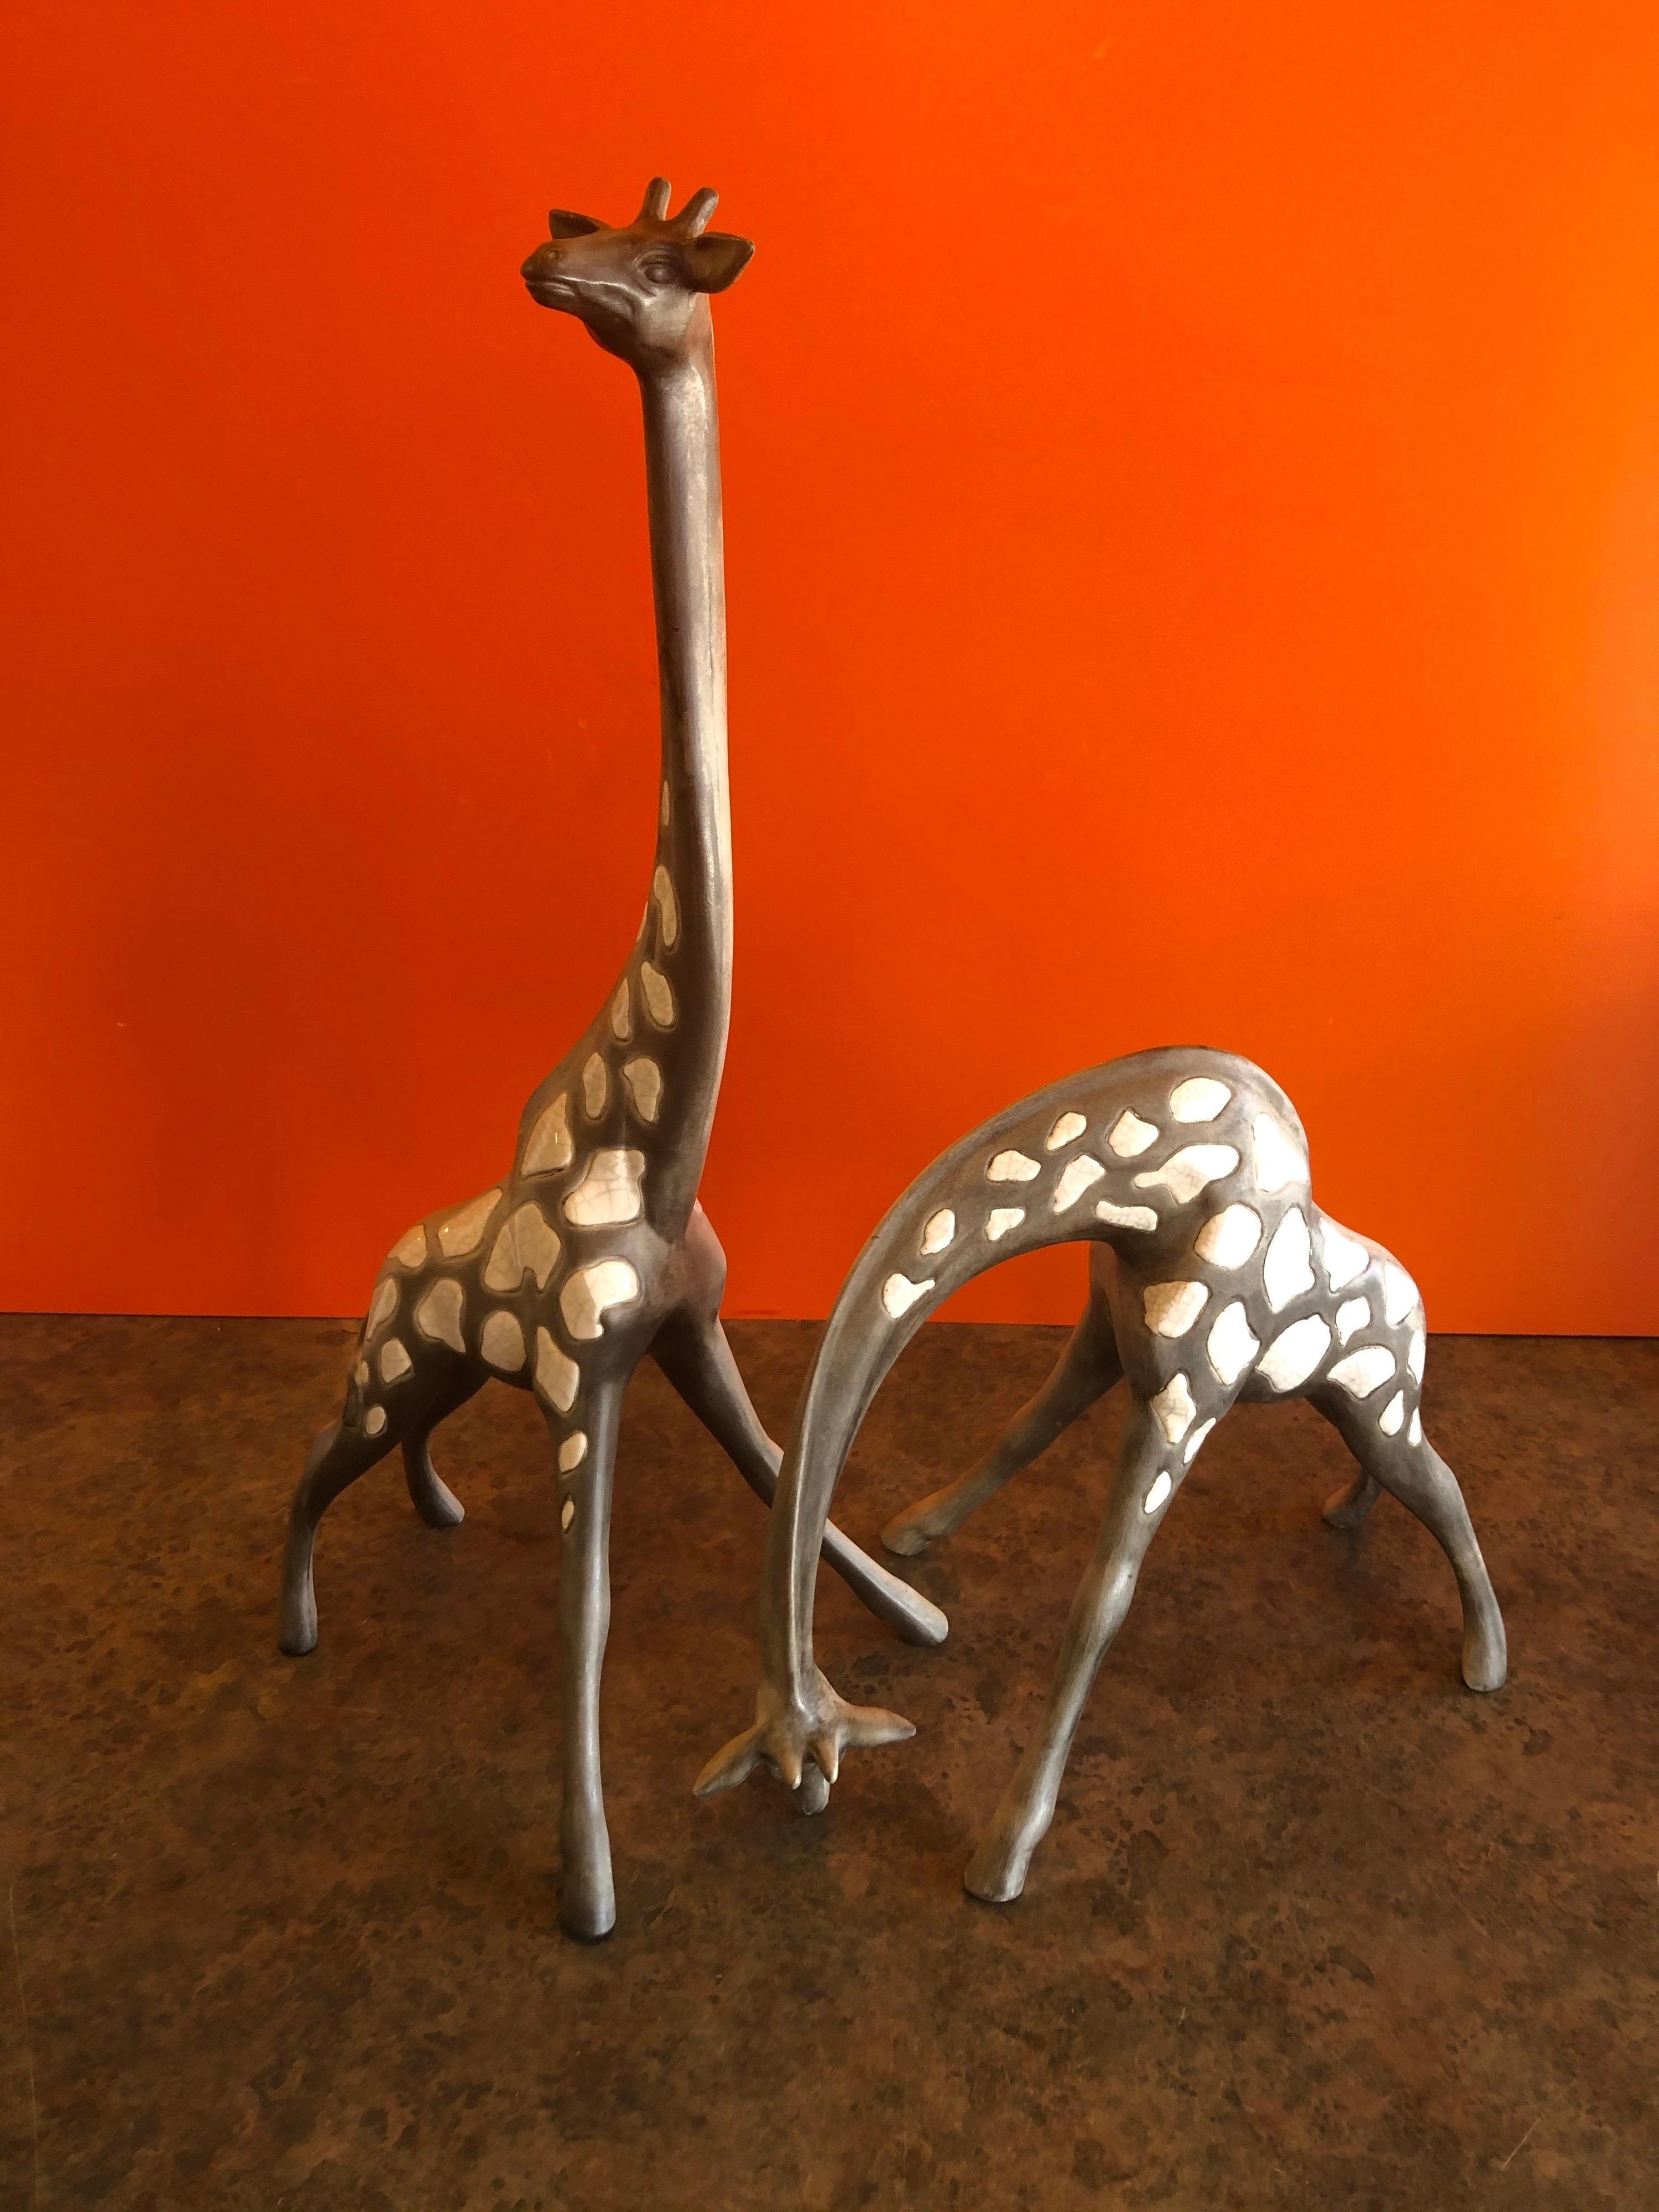 Wonderful and hard to find pair of midcentury ceramic giraffes by McFarlin Freeman Pottery, circa 1960s. The pair are well detailed and super delicate, the large giraffe measures 8.25